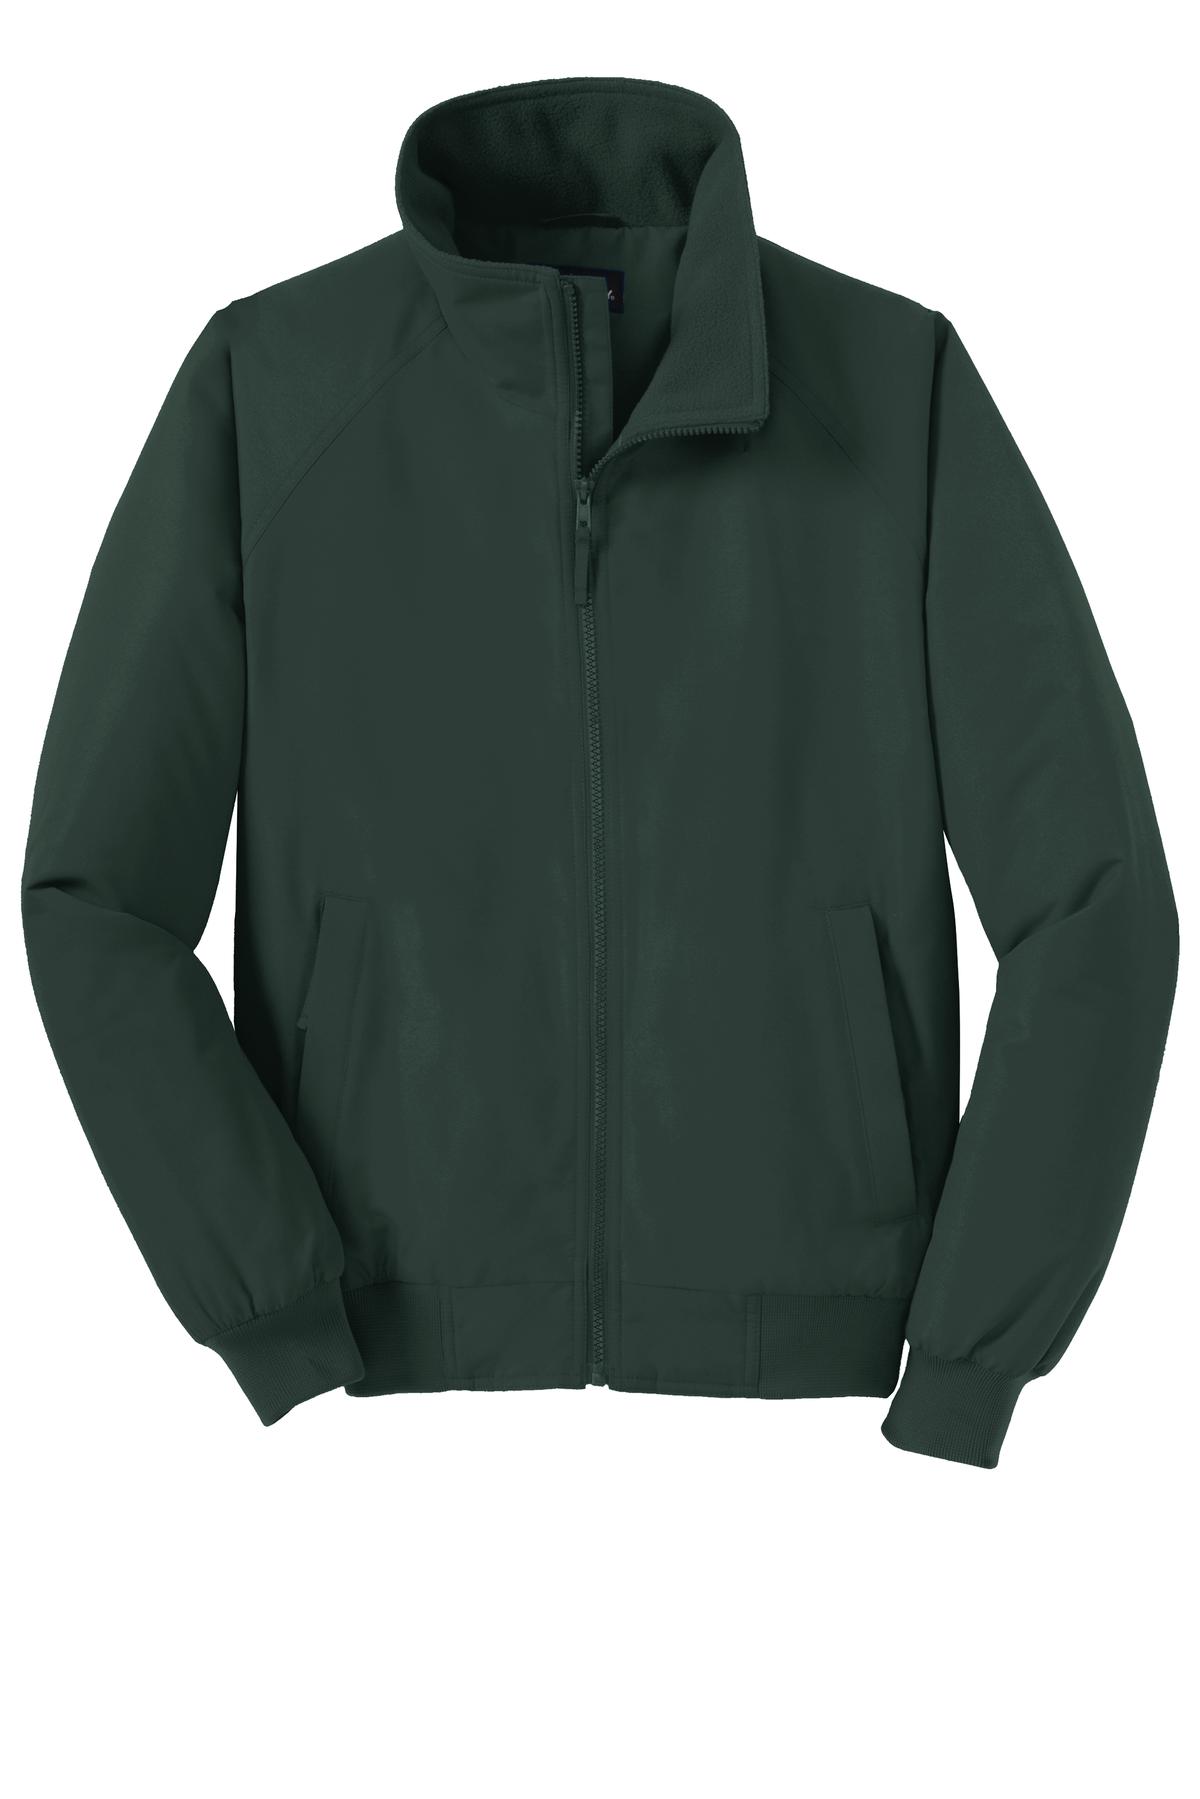 Port Authority Tlj328 Tall Charger Jacket | Jiffy Shirts